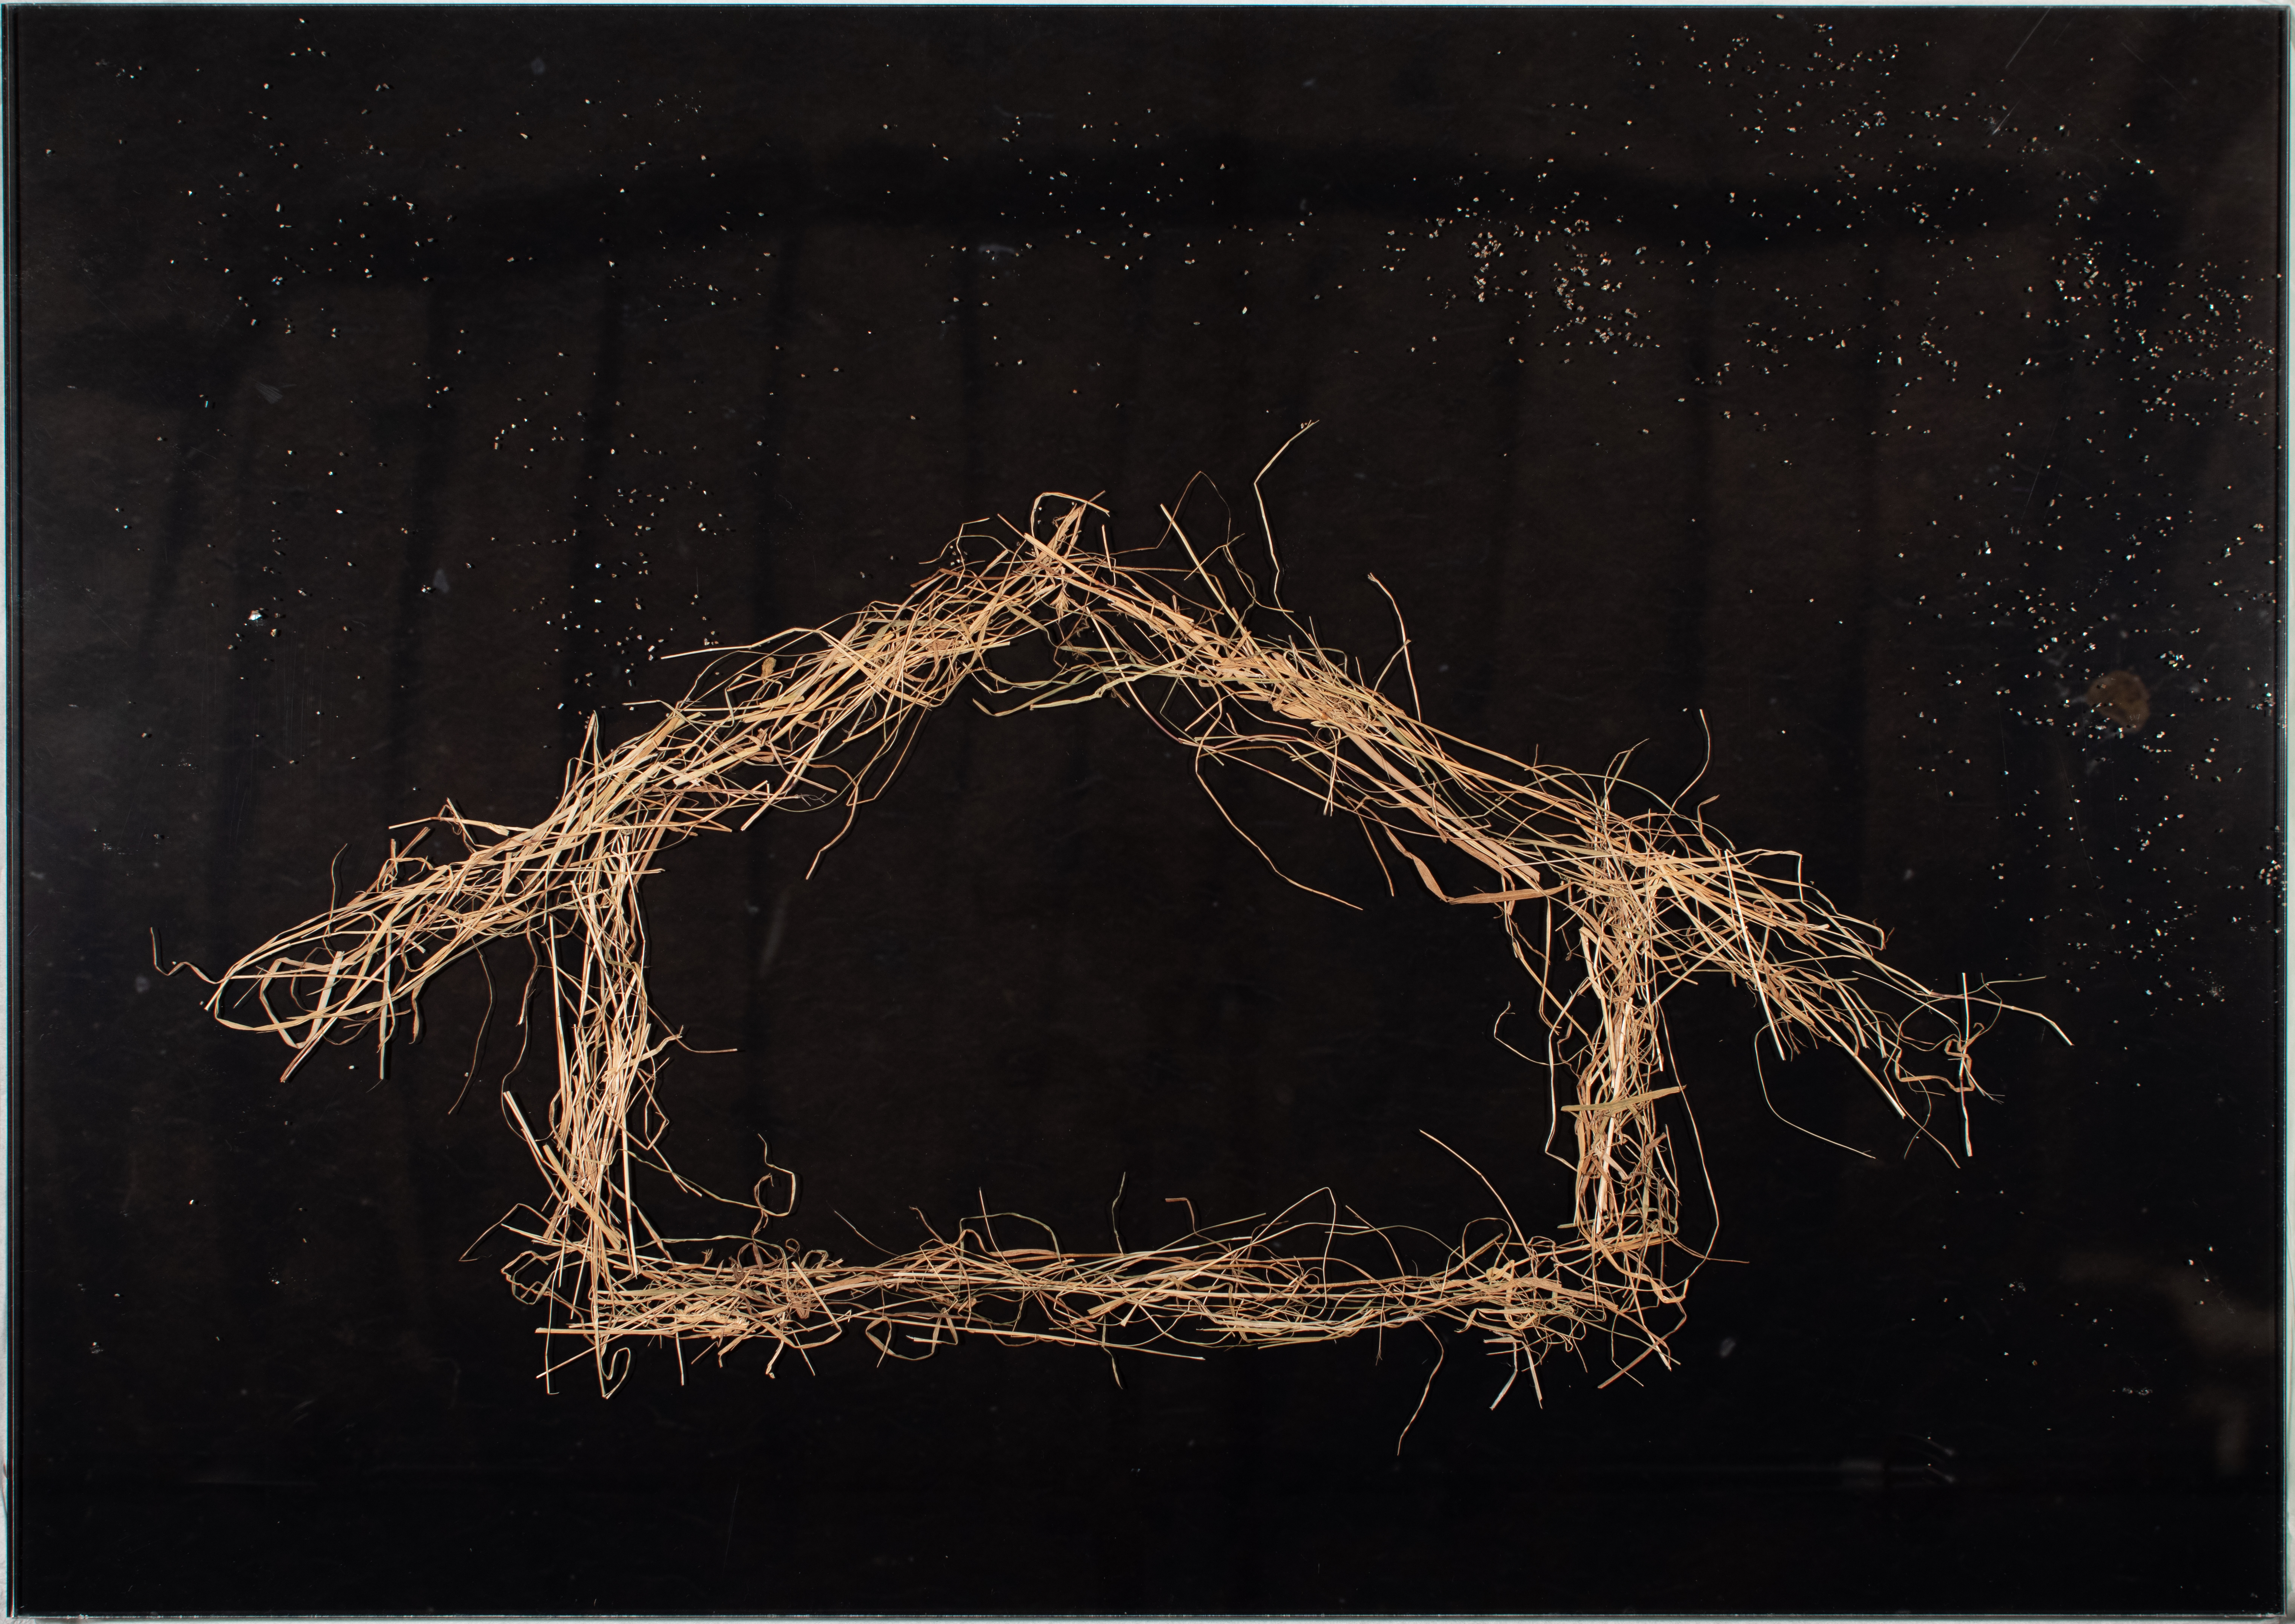 An artwork by George Watson featuring a whare or house form created in straw on a black background. 